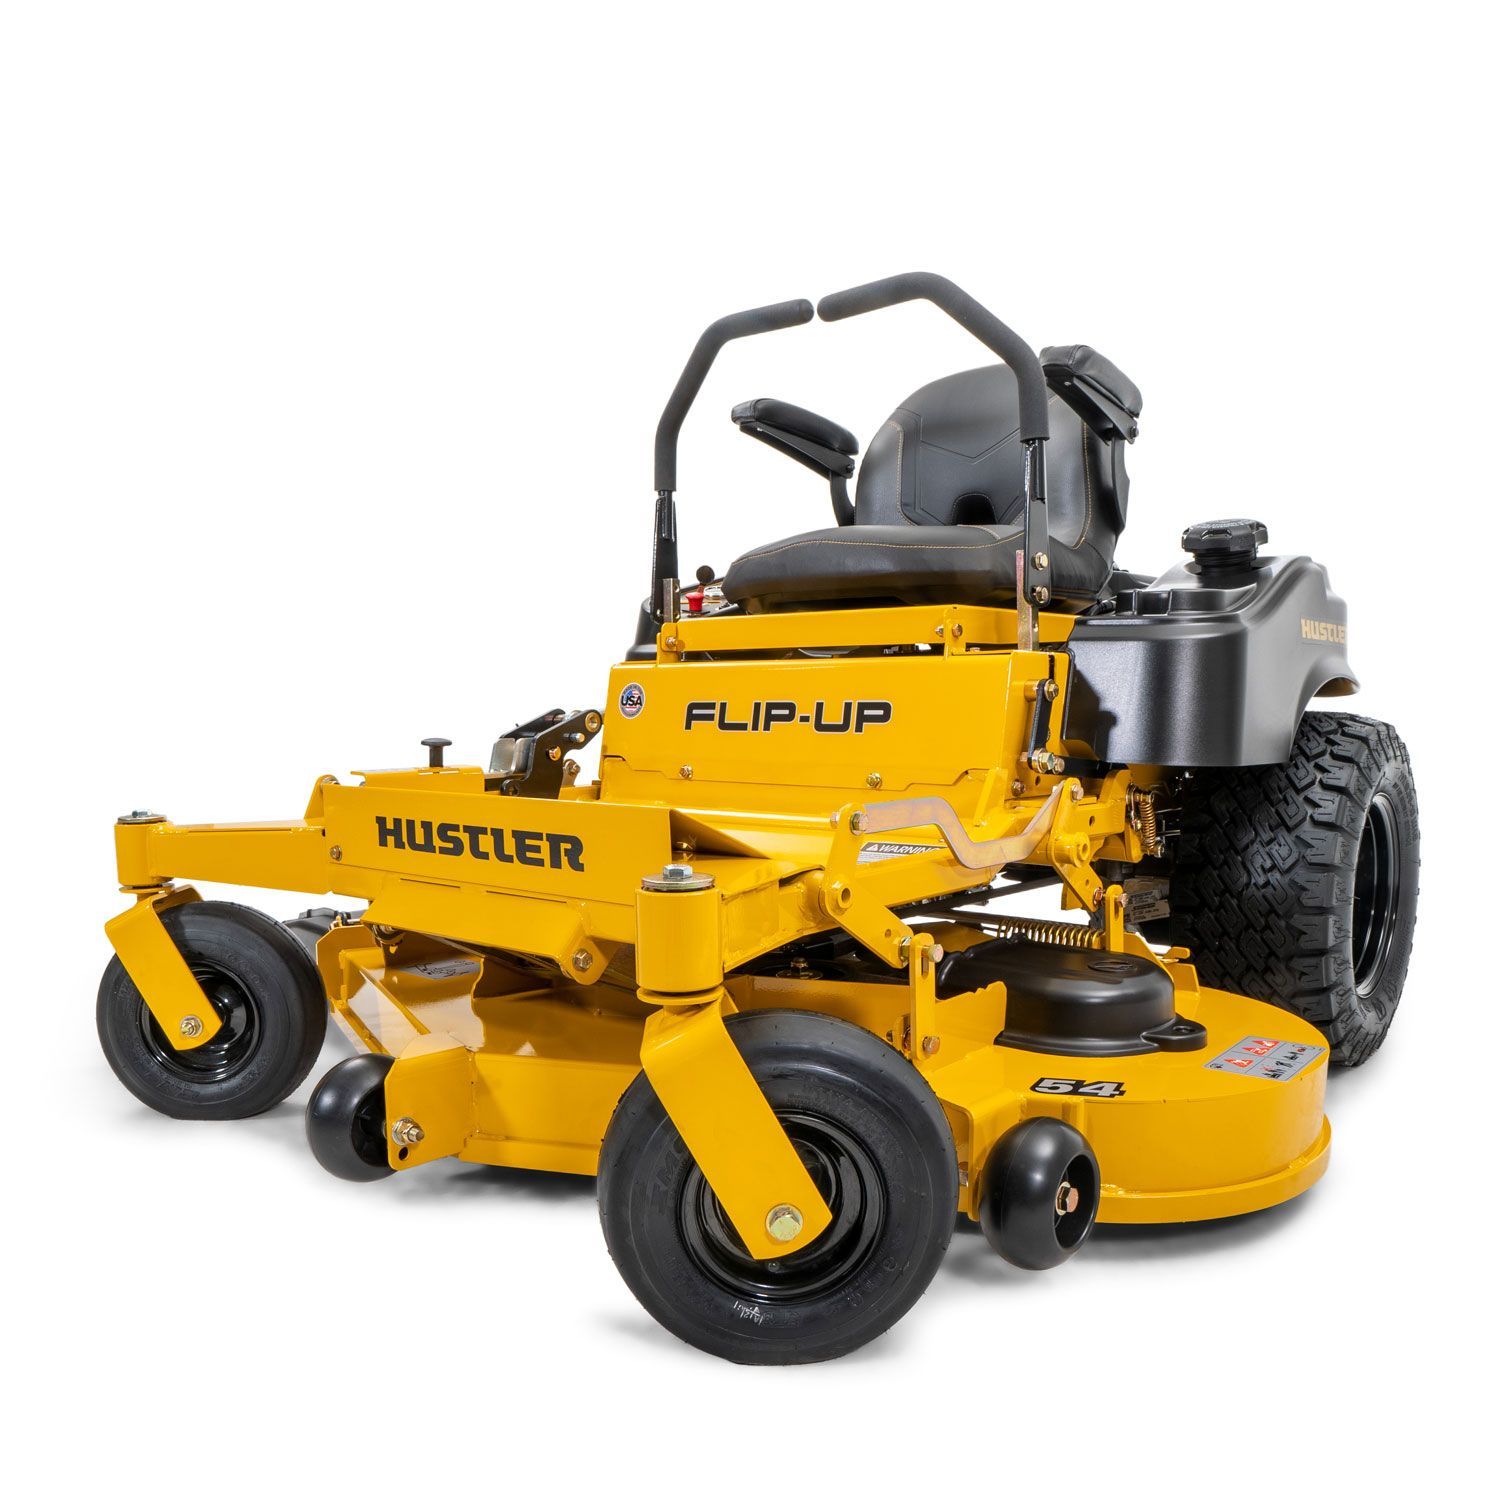 A yellow hustler mower is sitting on a white surface